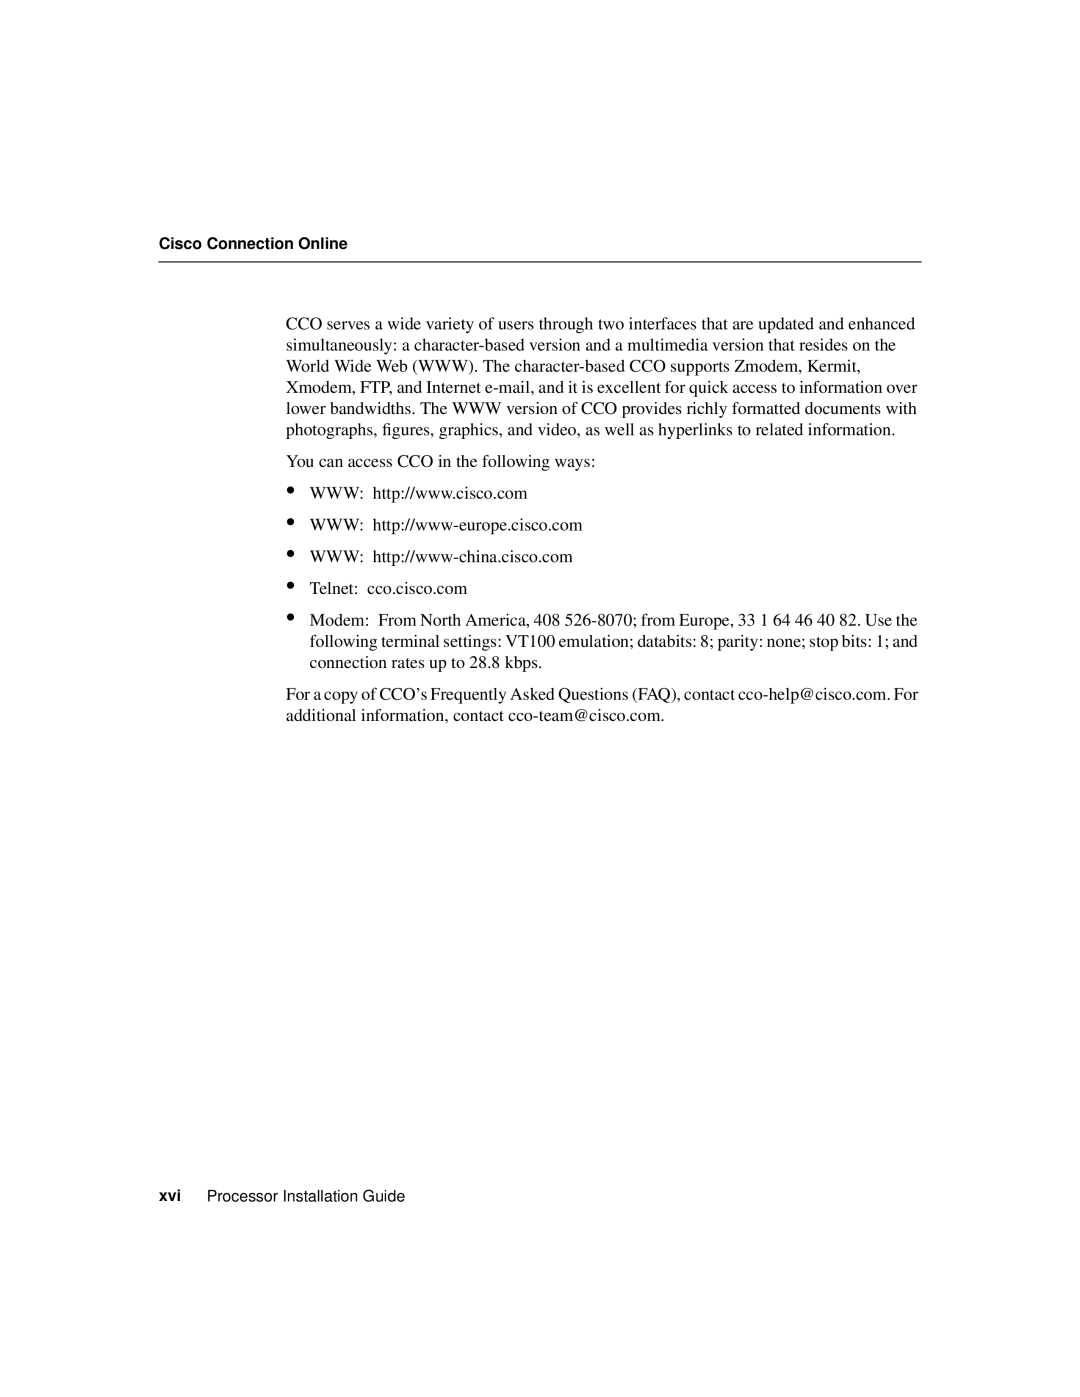 Cisco Systems Computer Accessories manual You can access CCO in the following ways 